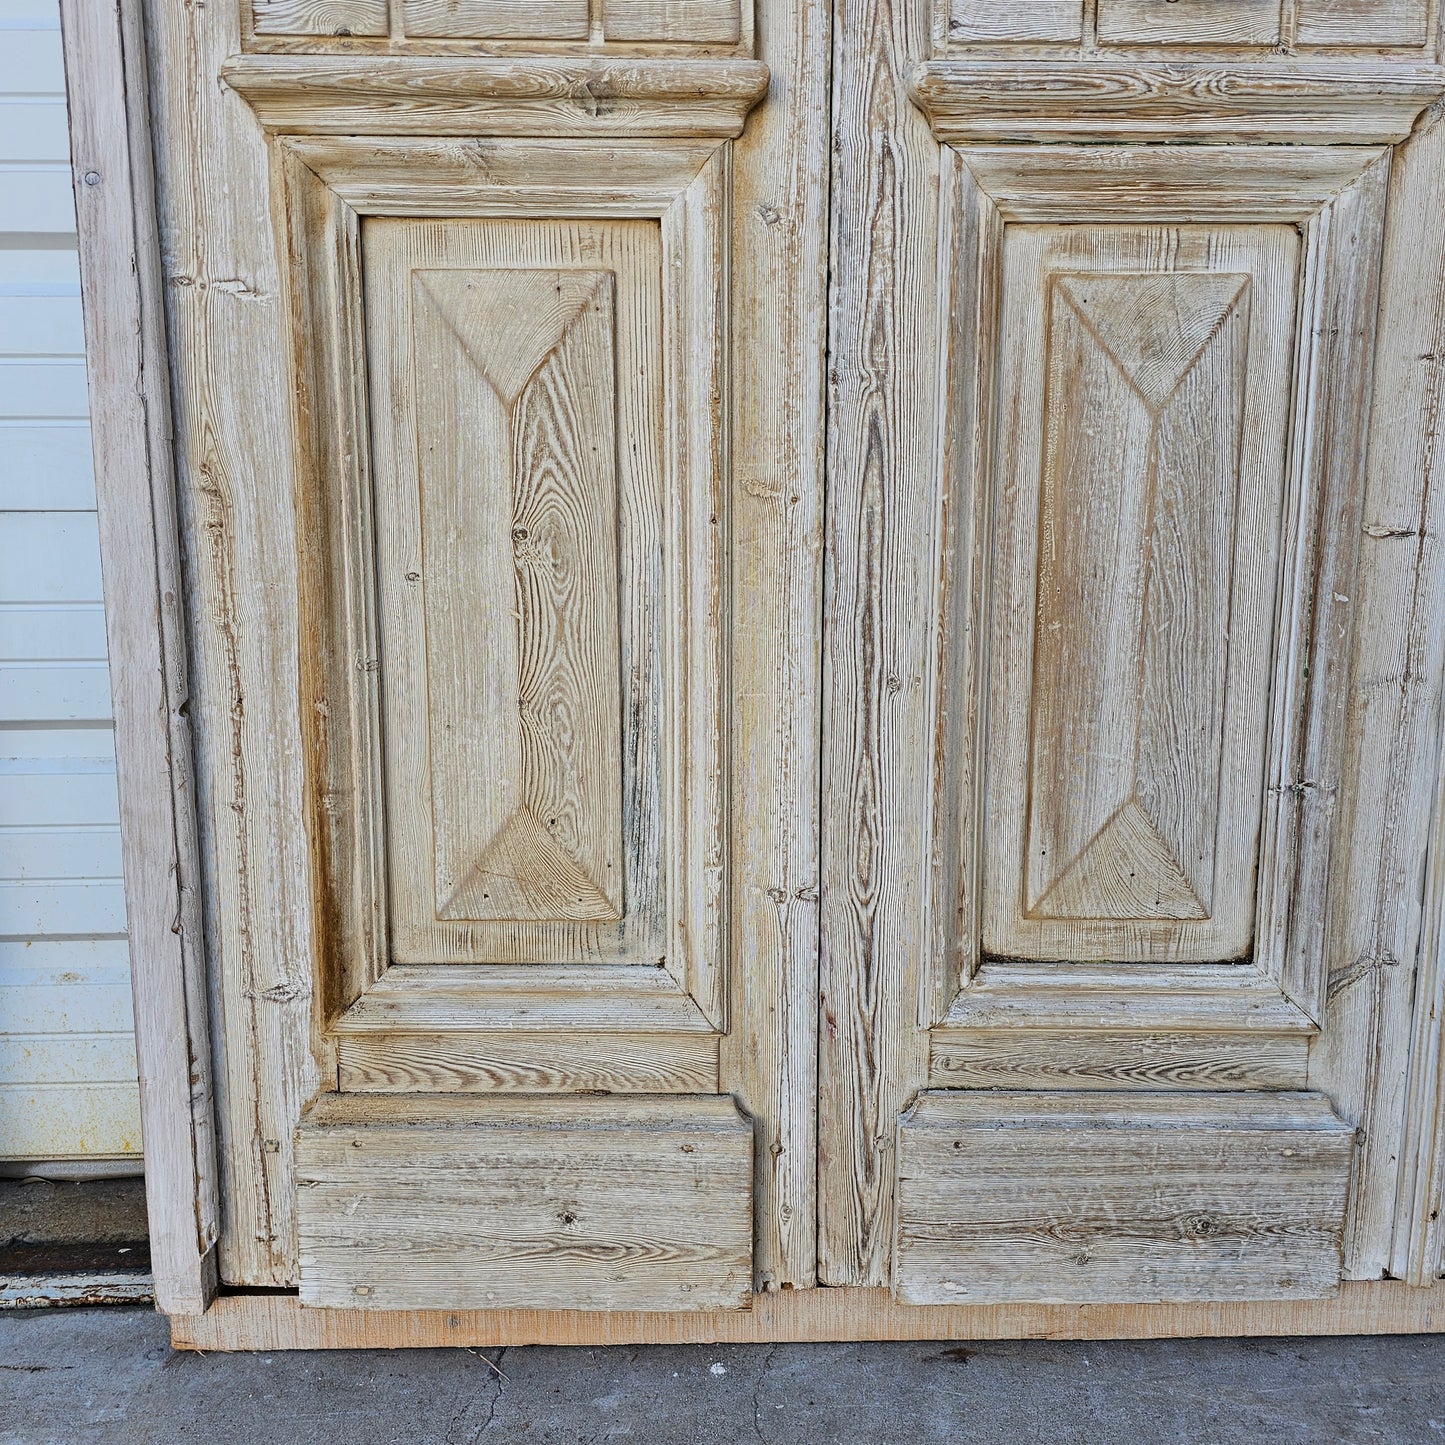 Set of 4 Painted Wood Doors and Transom w/7 Panes